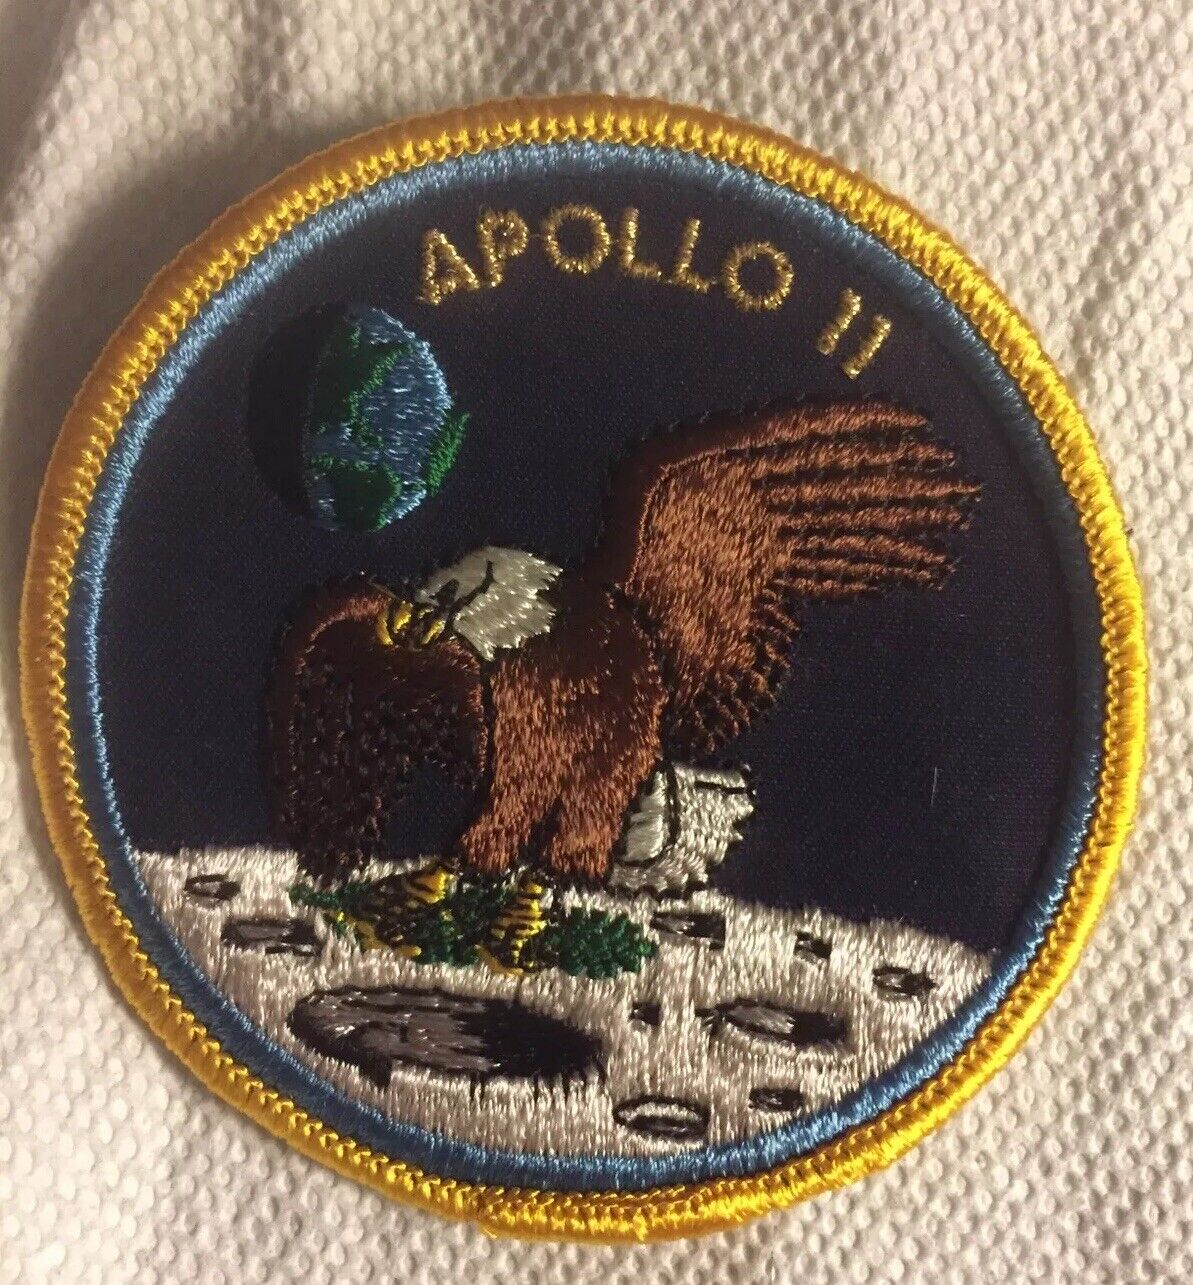 NASA Apollo 11 Authentic 1969 patch Made By Lion Brothers Mint